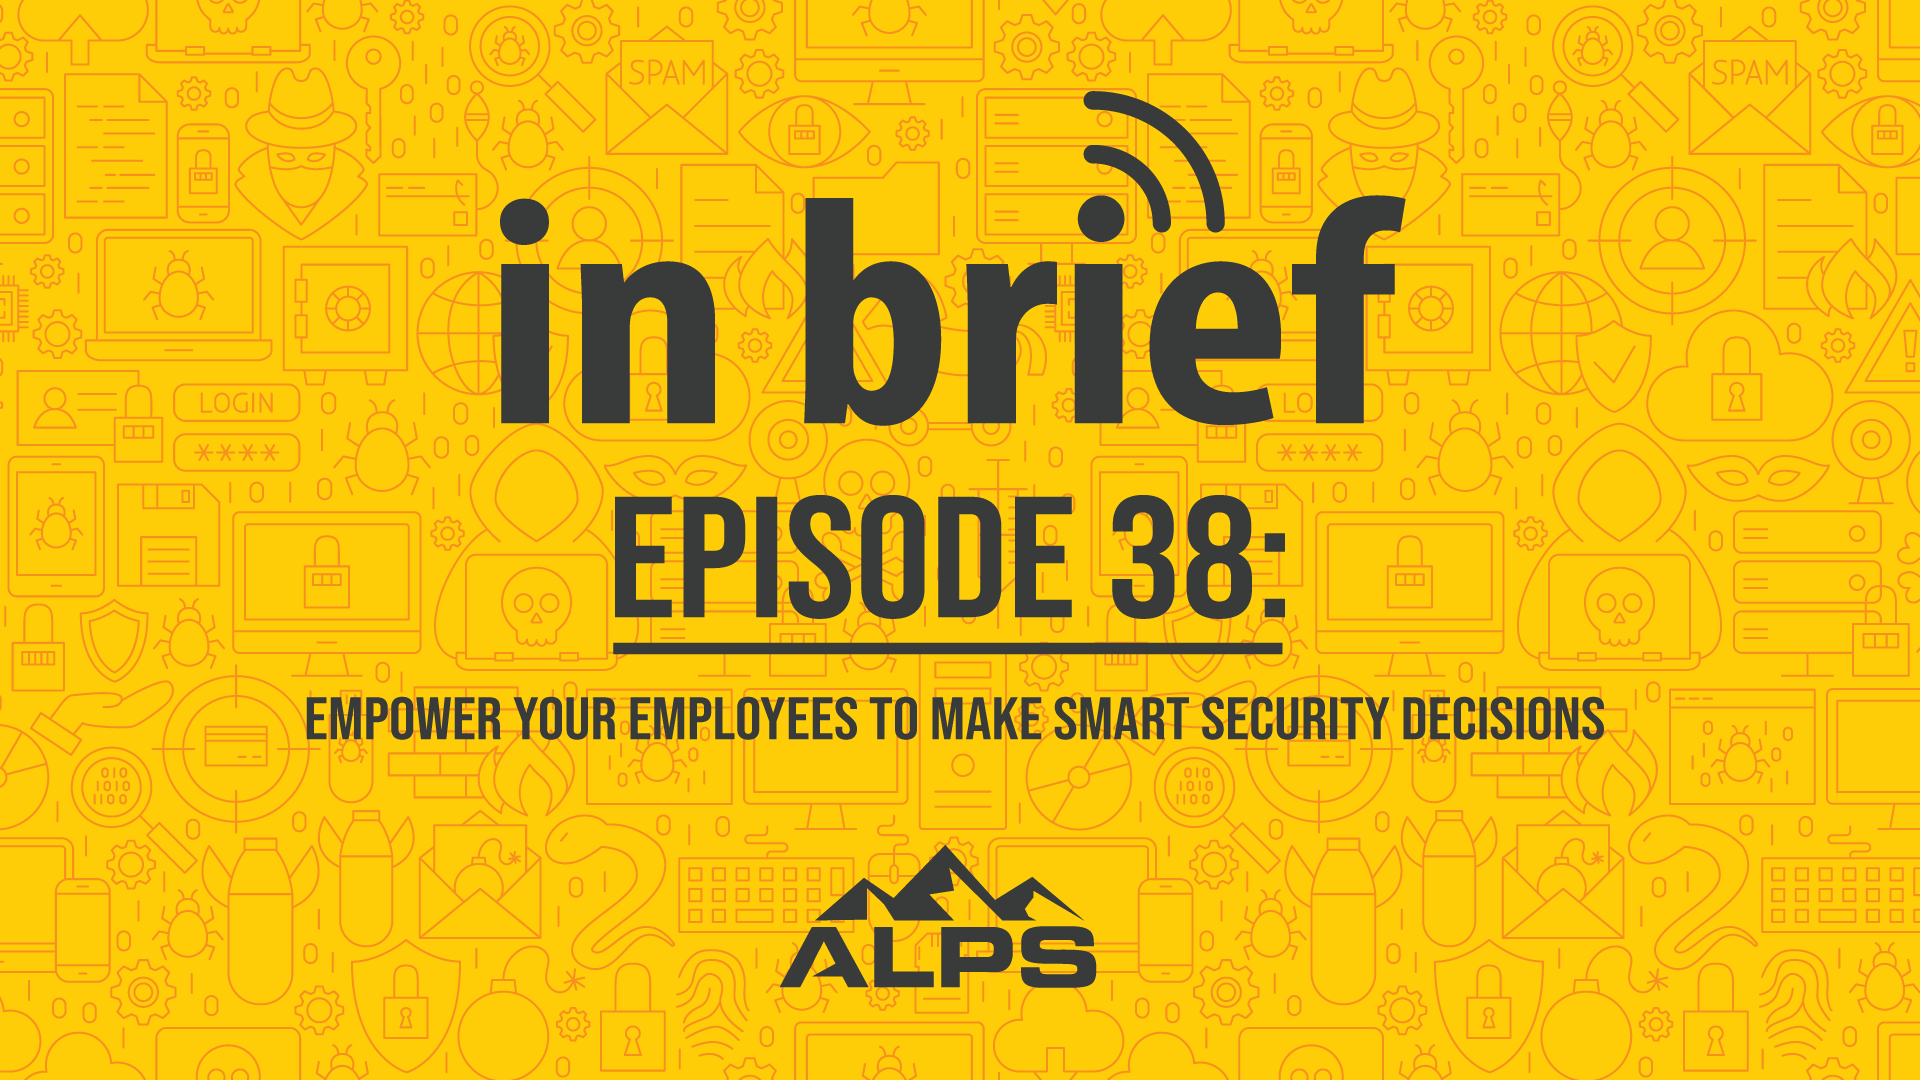 ALPS In Brief – Episode 38: Empower Your Employees to Make Smart Security Decisions